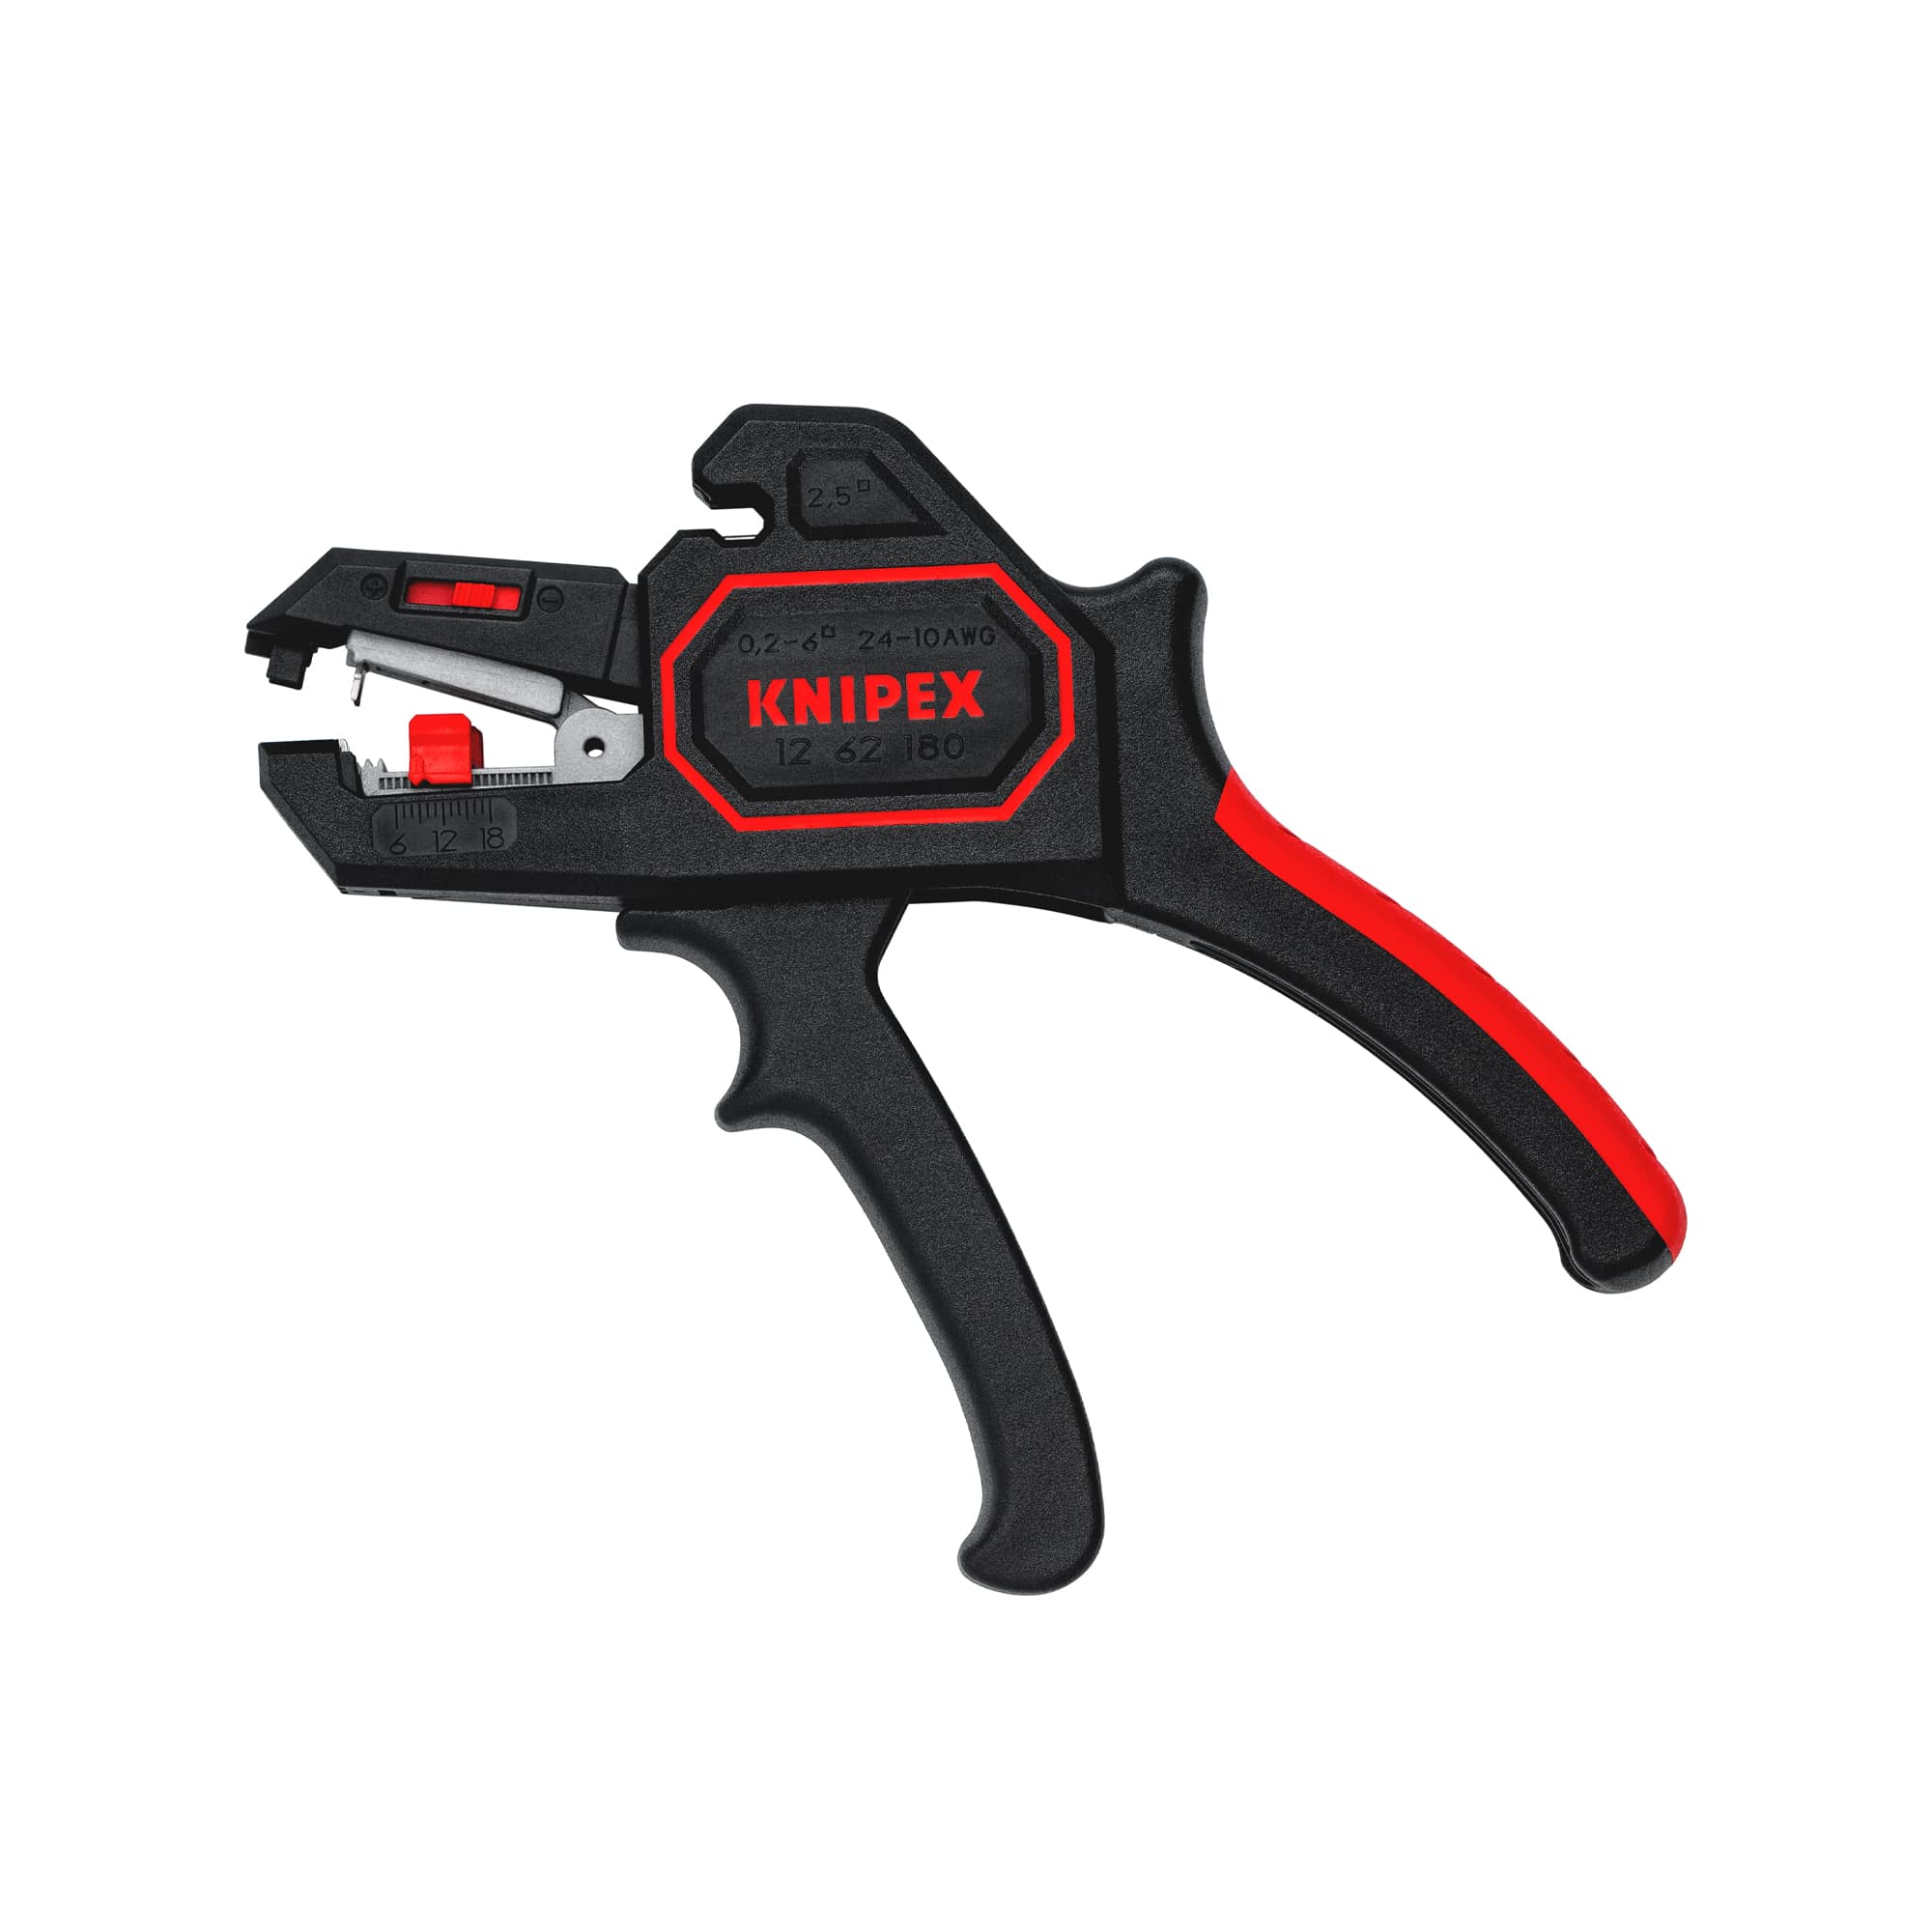 HC133617 - Pinza Pelacable Automatica Pistola 24-10Awg Knipex 12 62 180 - 4003773054573